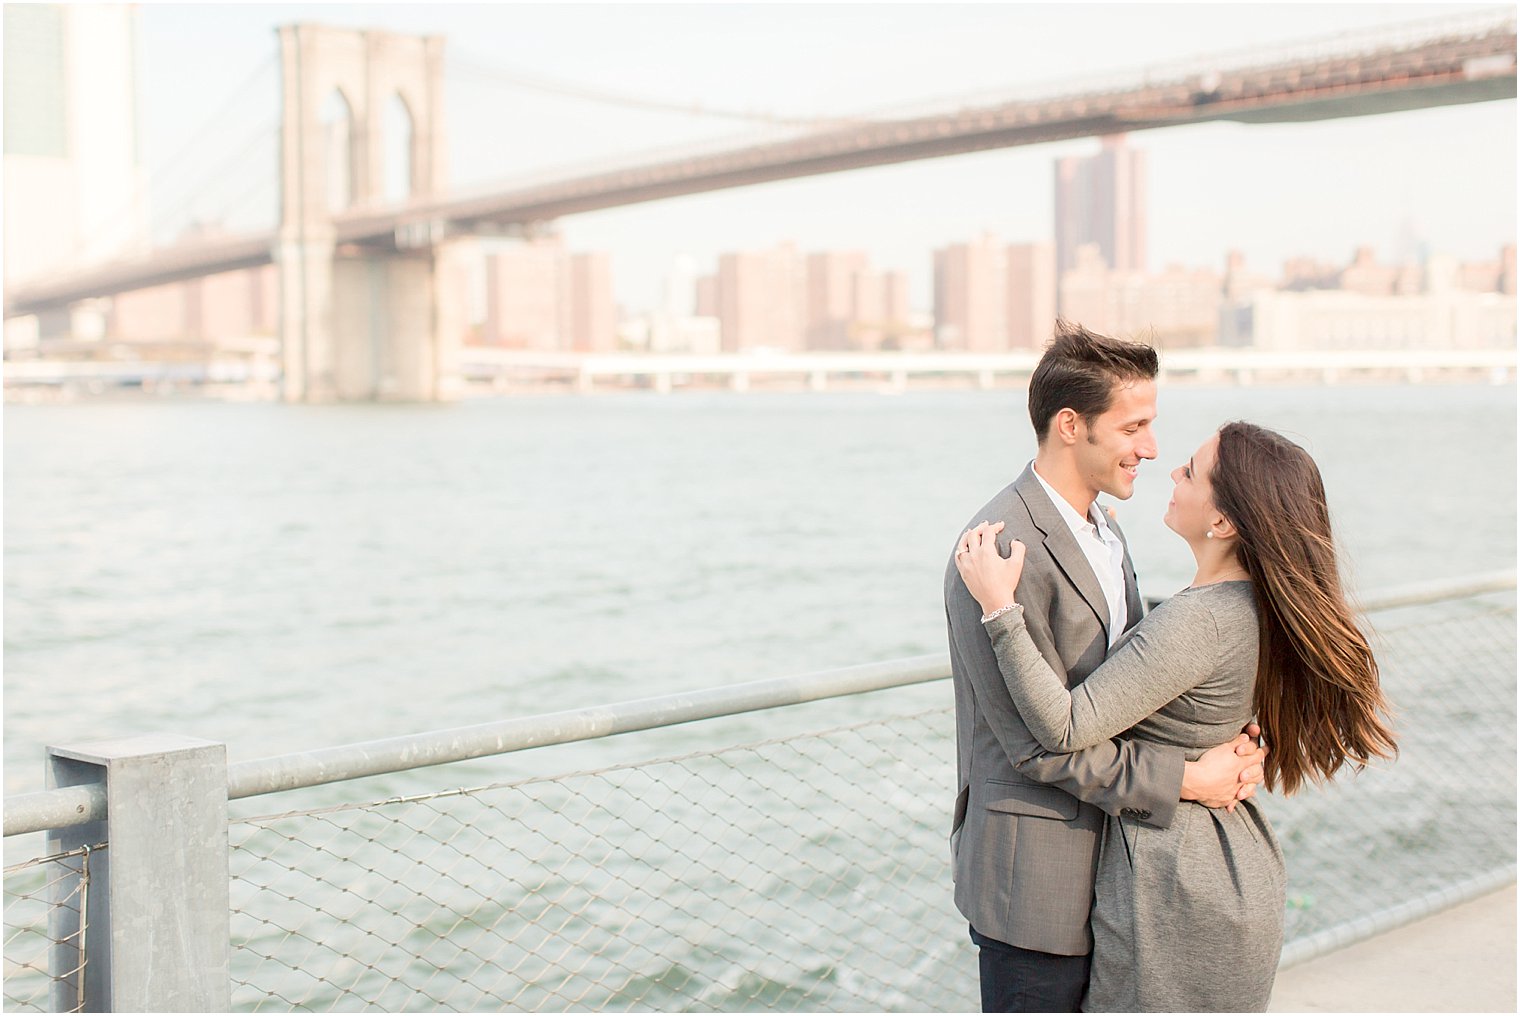 Windy engagement session in DUMBO